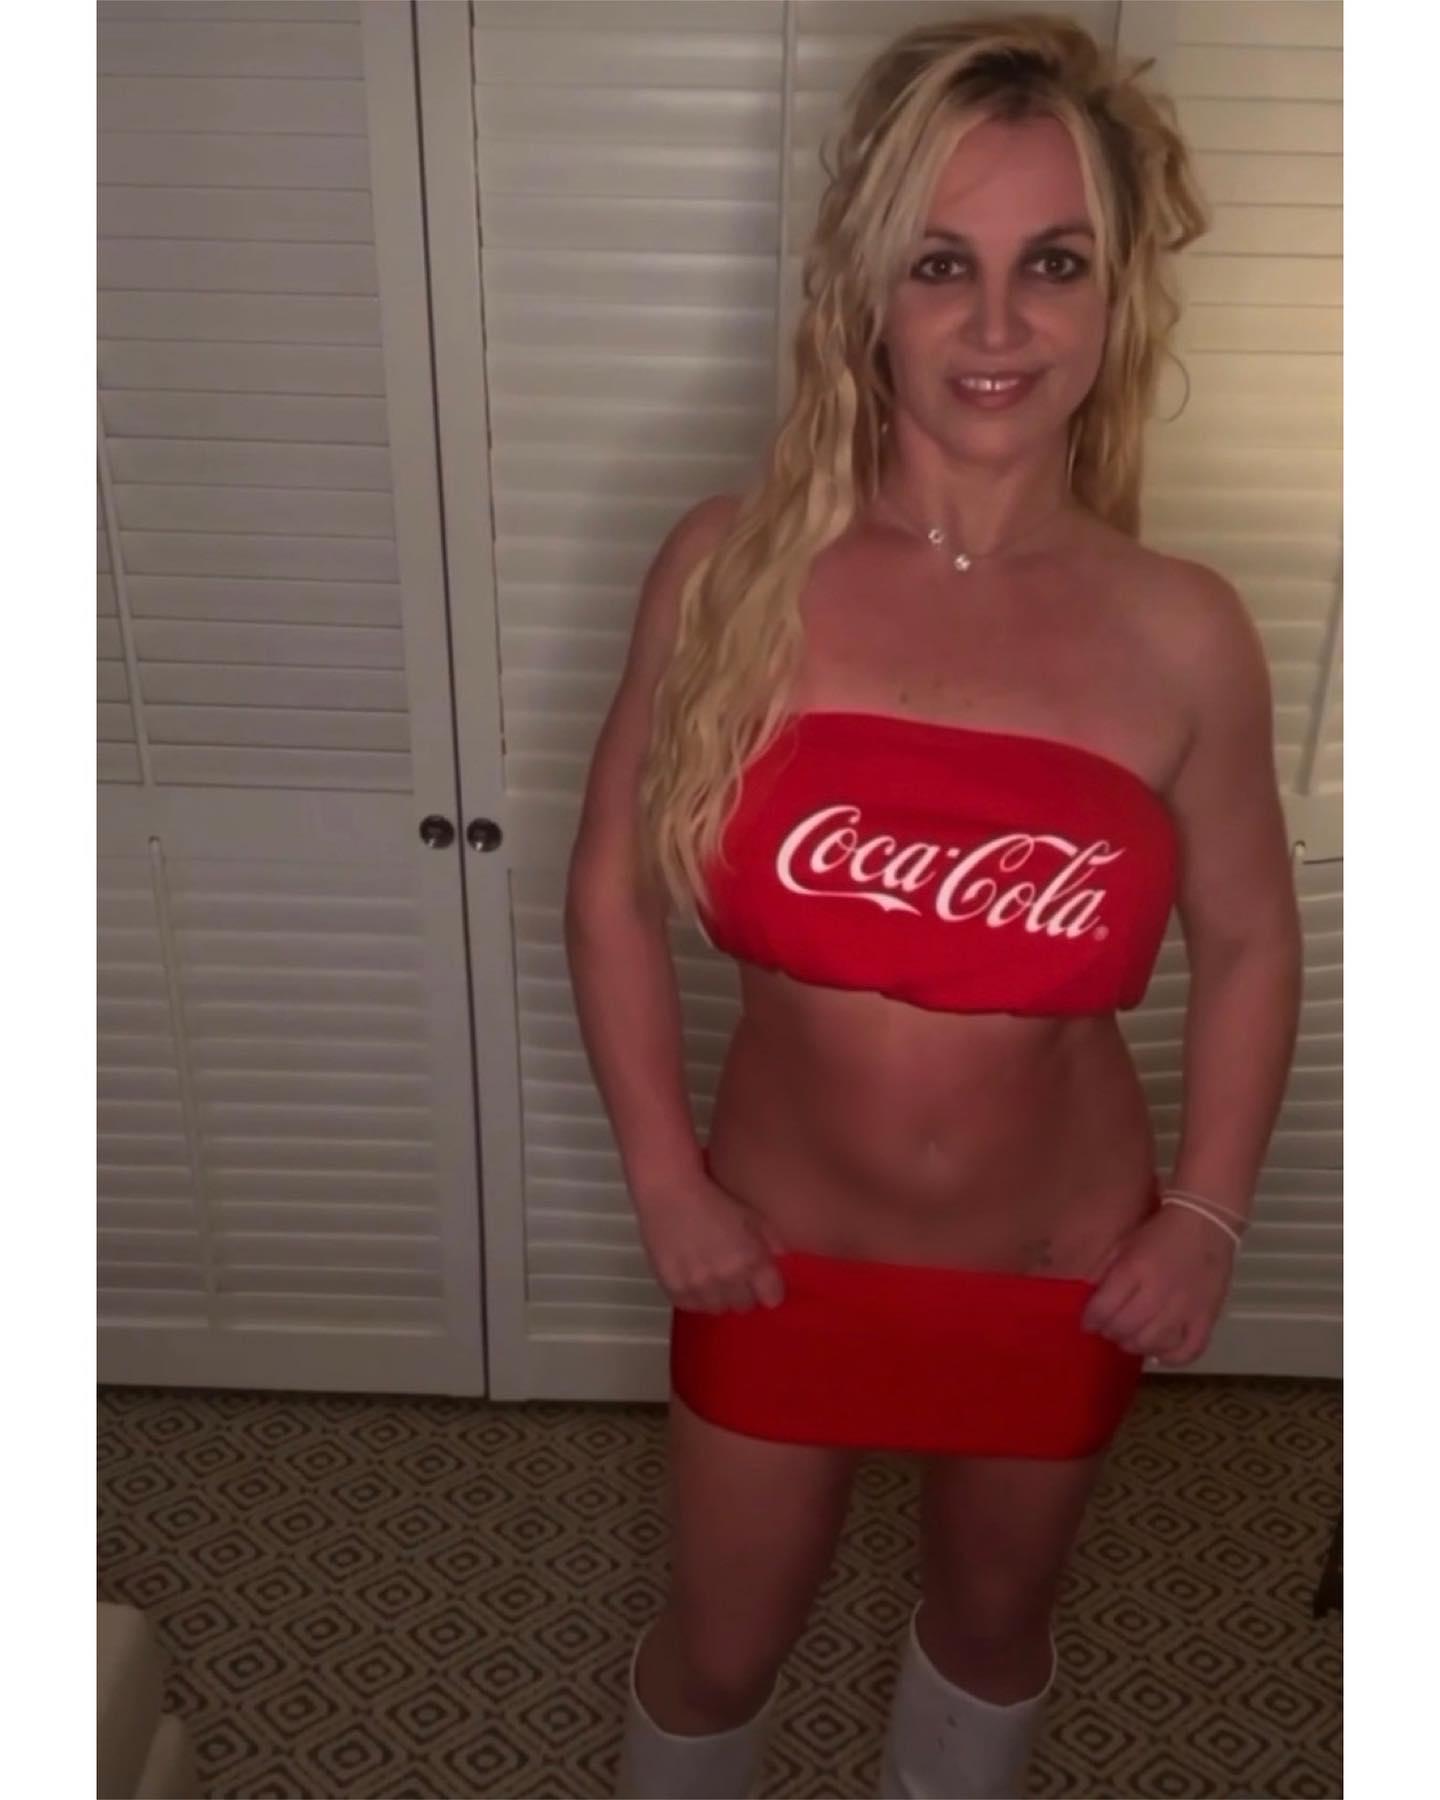 Britney Spears in her Coca-Cola outfit